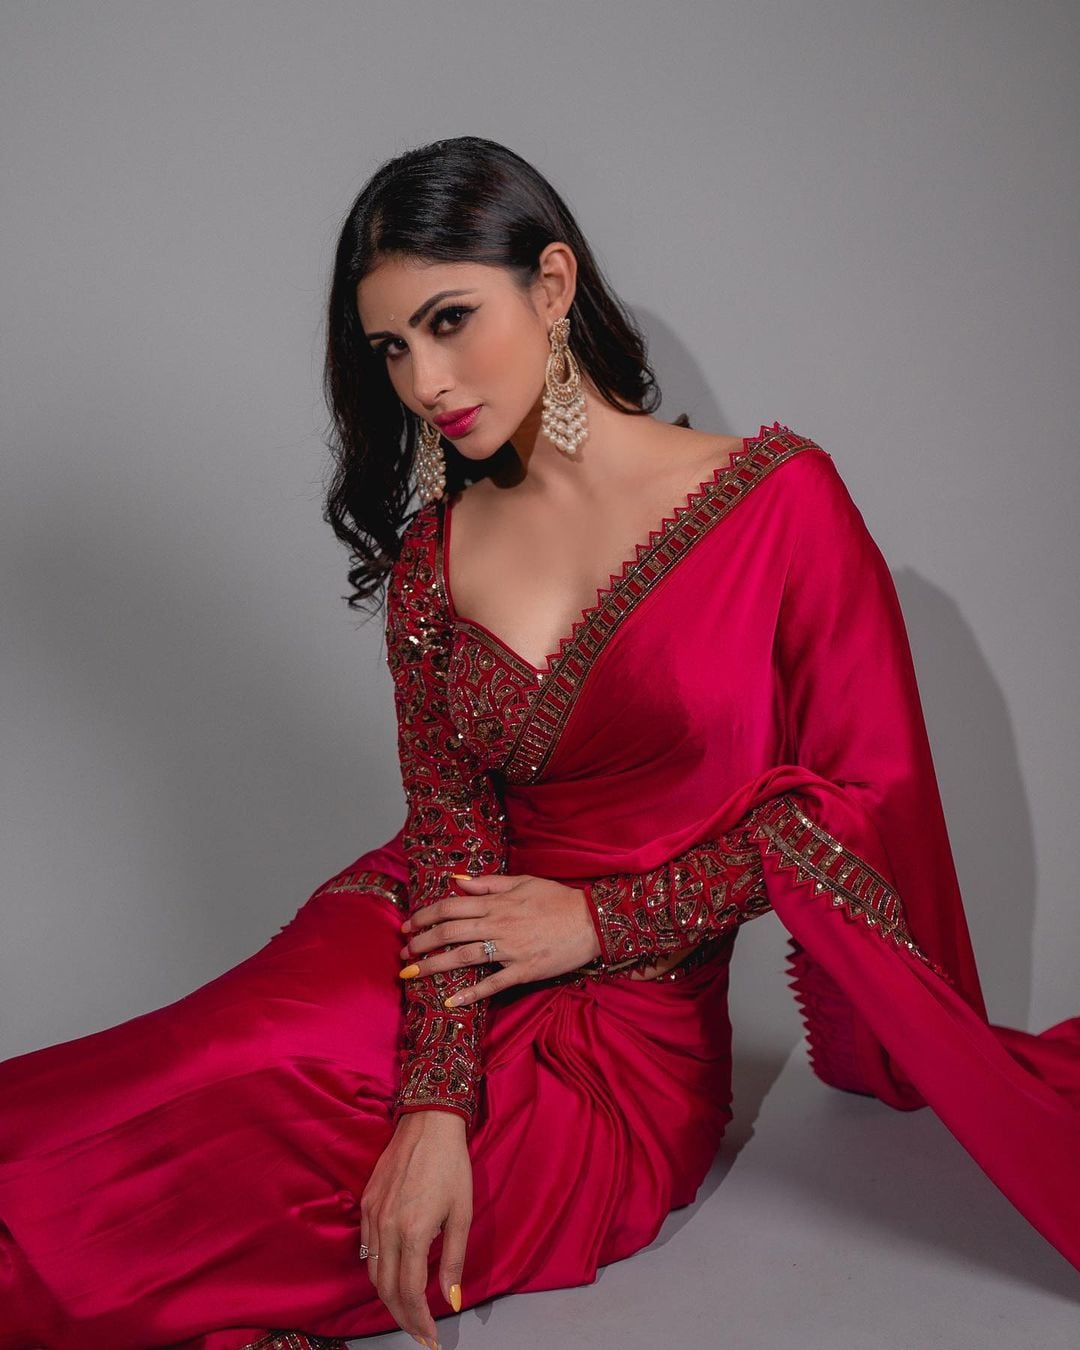 Mouni Roy pairs the plain saree with an embellished full-sleeve blouse.